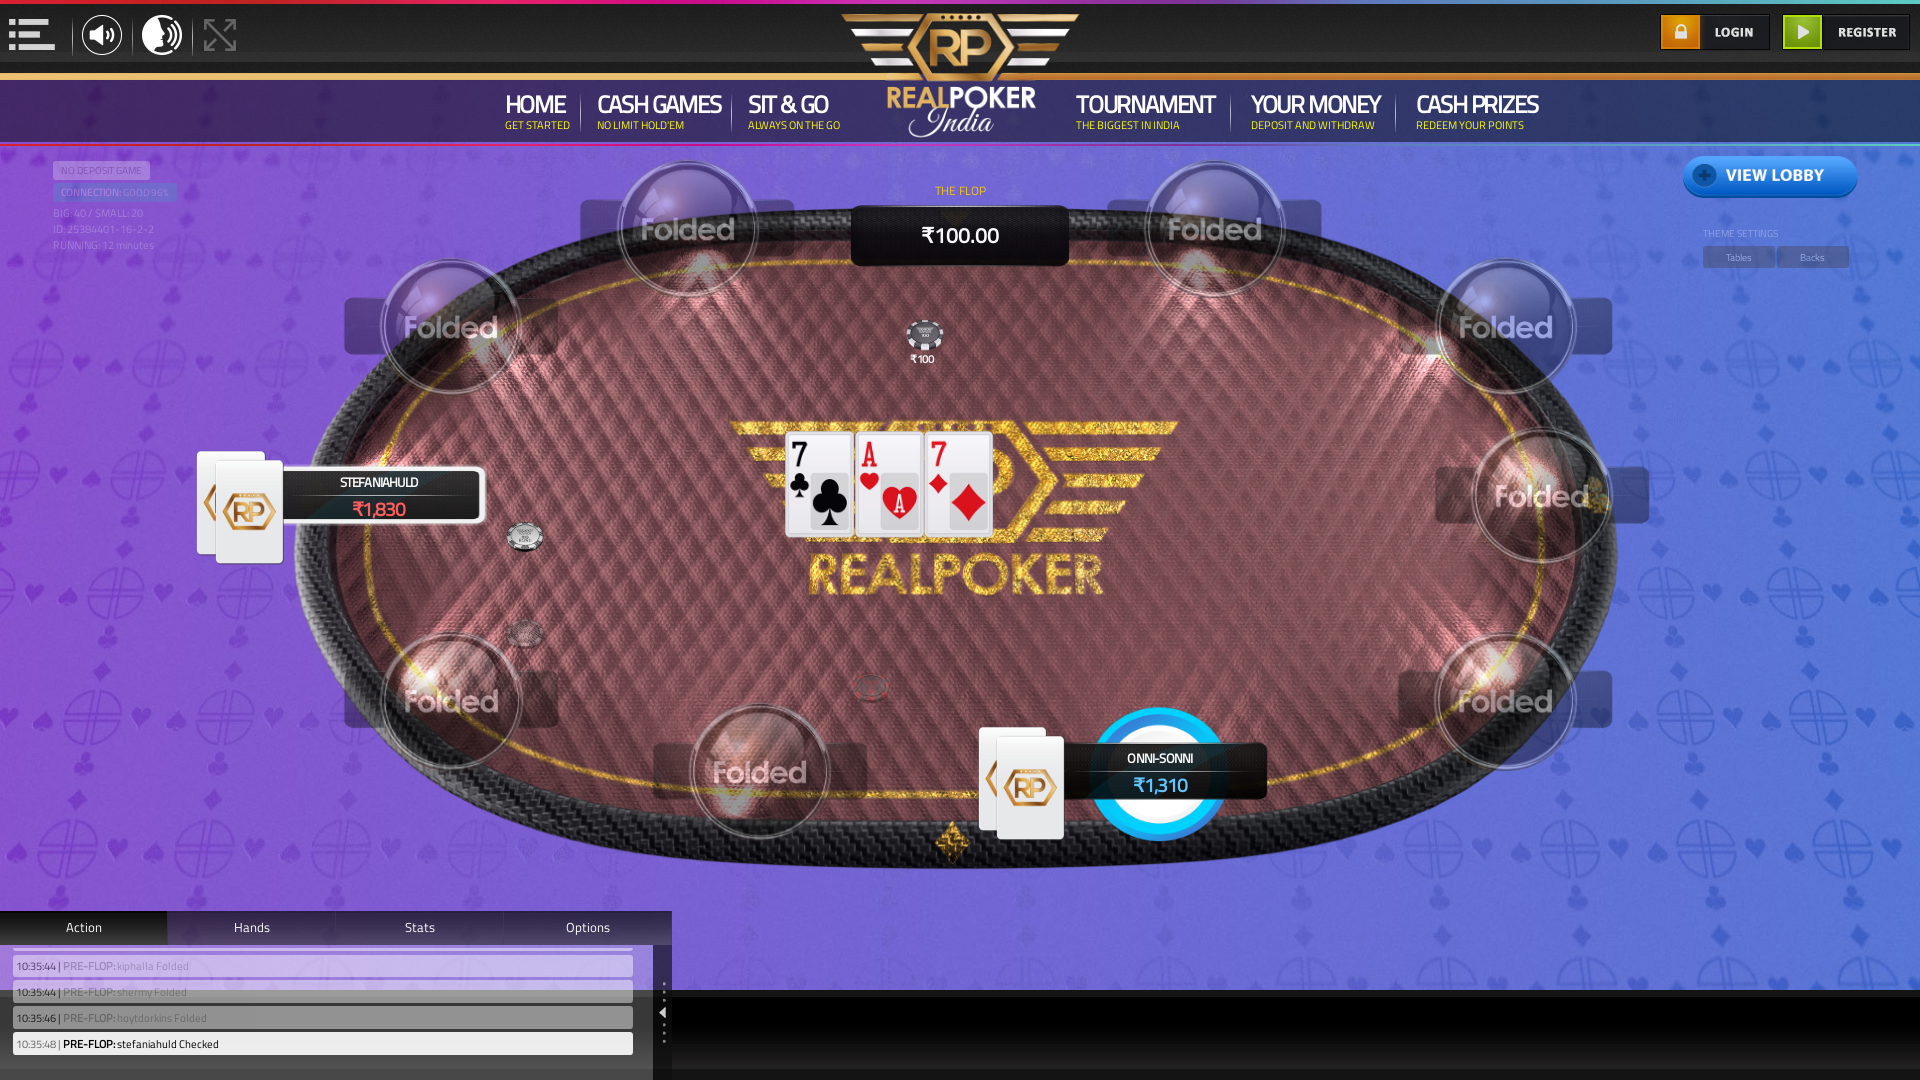 Real indian poker on a 10 player table in the 12th minute of the game